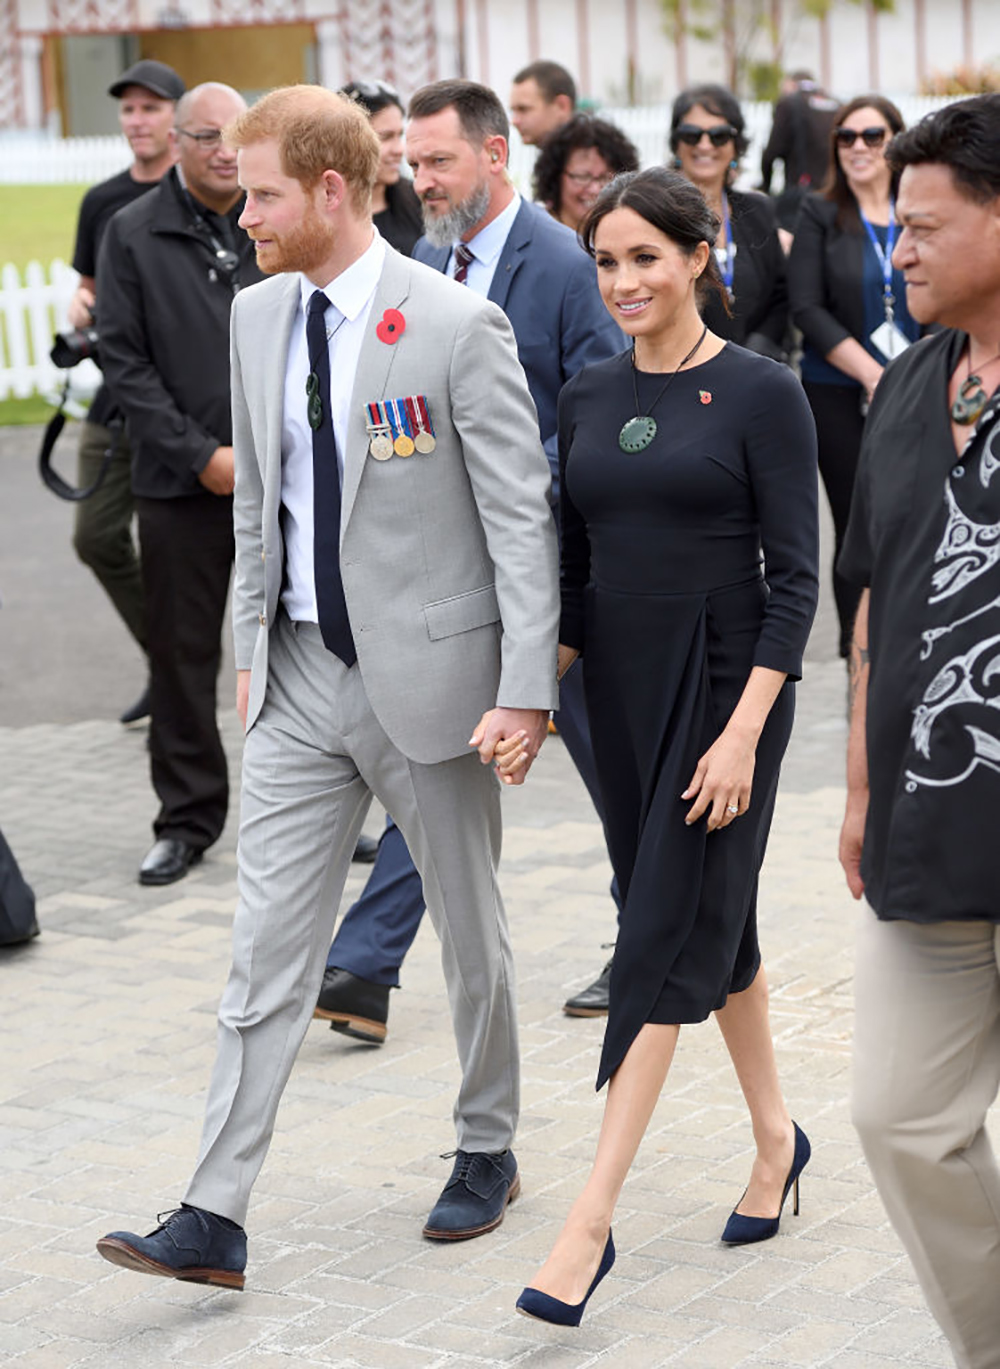 ROTORUA, NEW ZEALAND - OCTOBER 31: Prince Harry, Duke of Sussex and Meghan, Duchess of Sussex visit Te Papaiouru Marae for a formal powhiri and luncheon on October 31, 2018 in Rotorua, New Zealand. The Duke and Duchess of Sussex are on their official 16-day Autumn tour visiting cities in Australia, Fiji, Tonga and New Zealand. (Photo by Karwai Tang/WireImage)